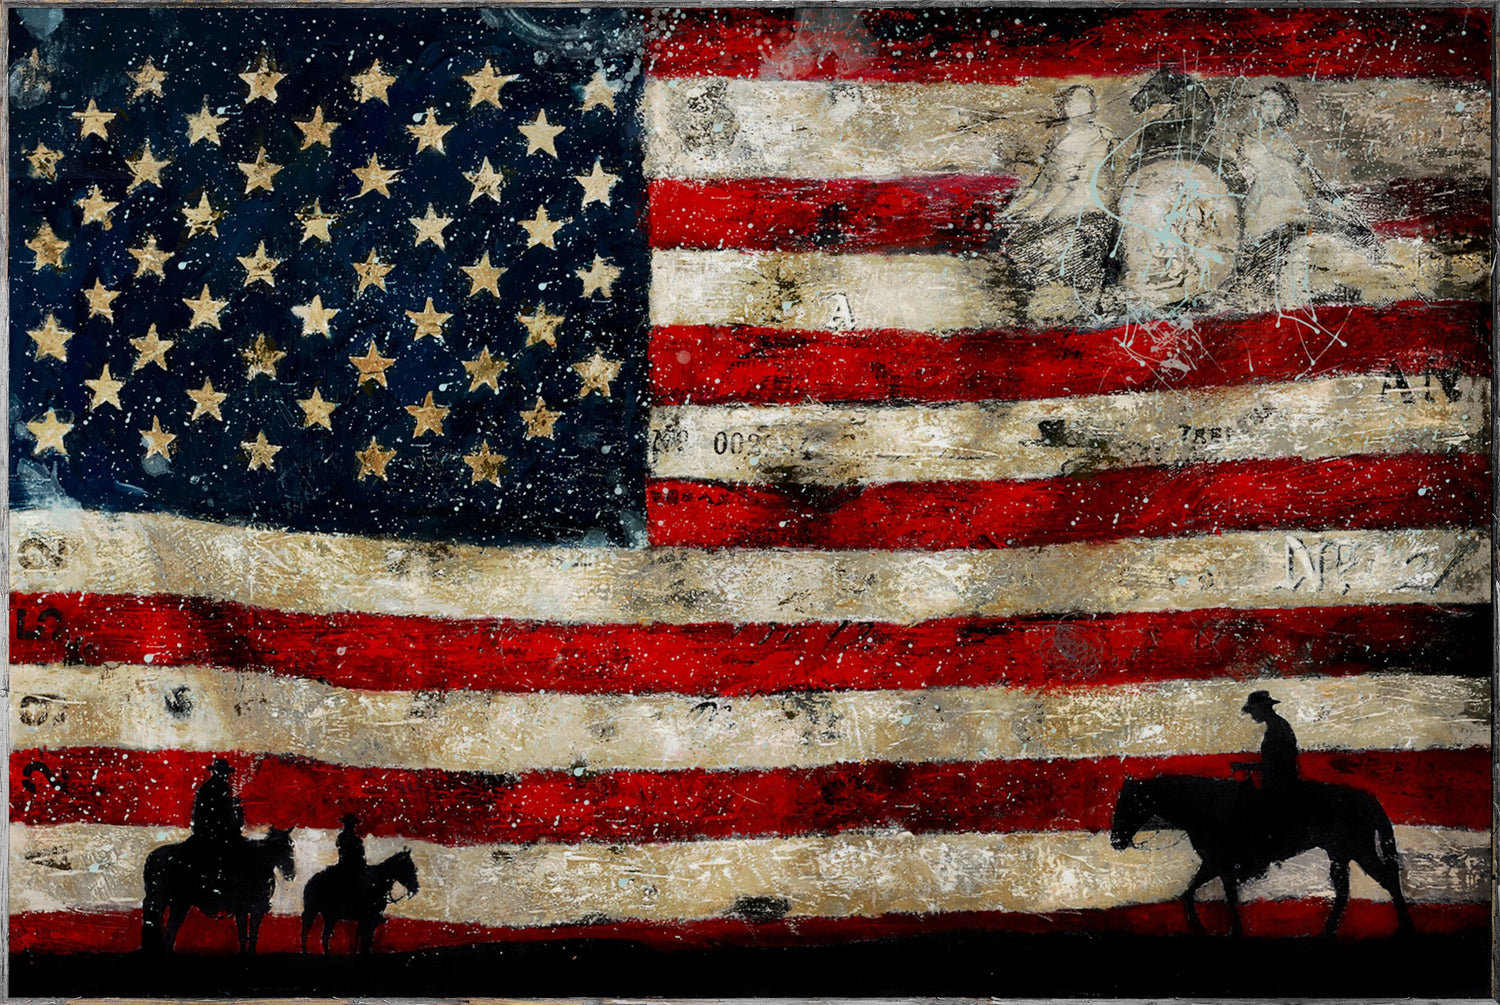 American Flag Painting by Artist Brian Liebenthal - Old Glory